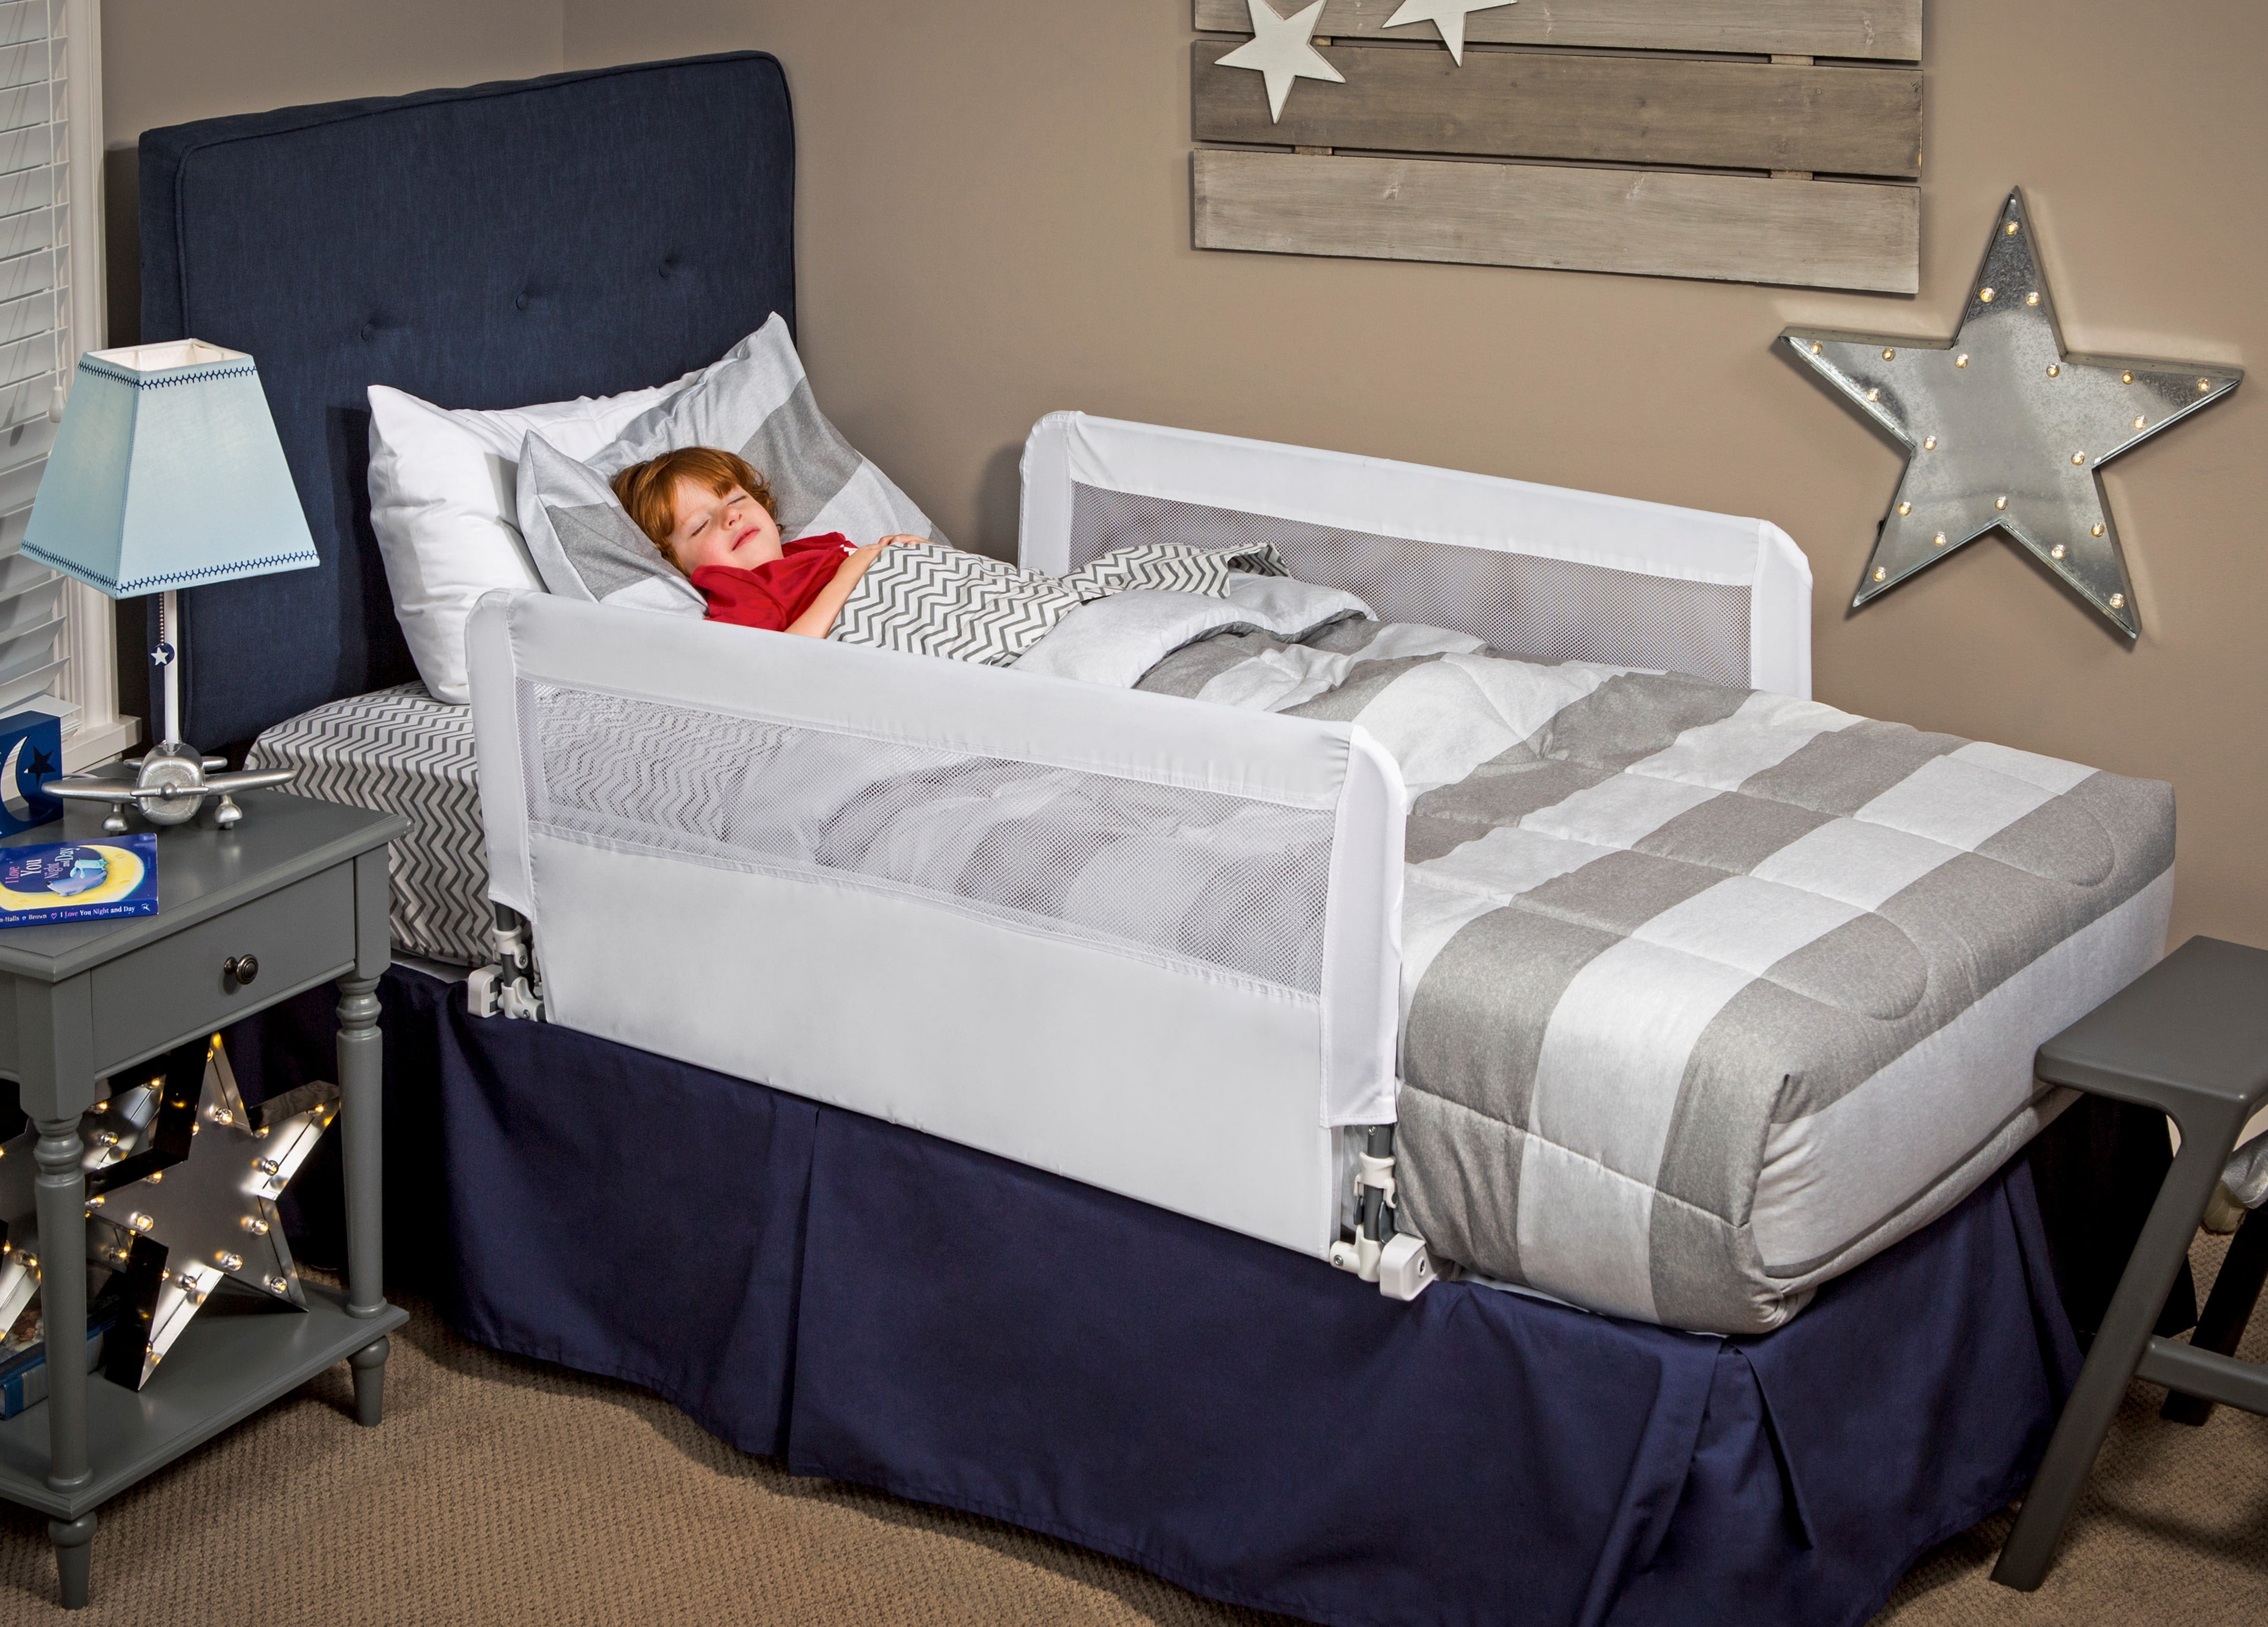 travel bed safety rail